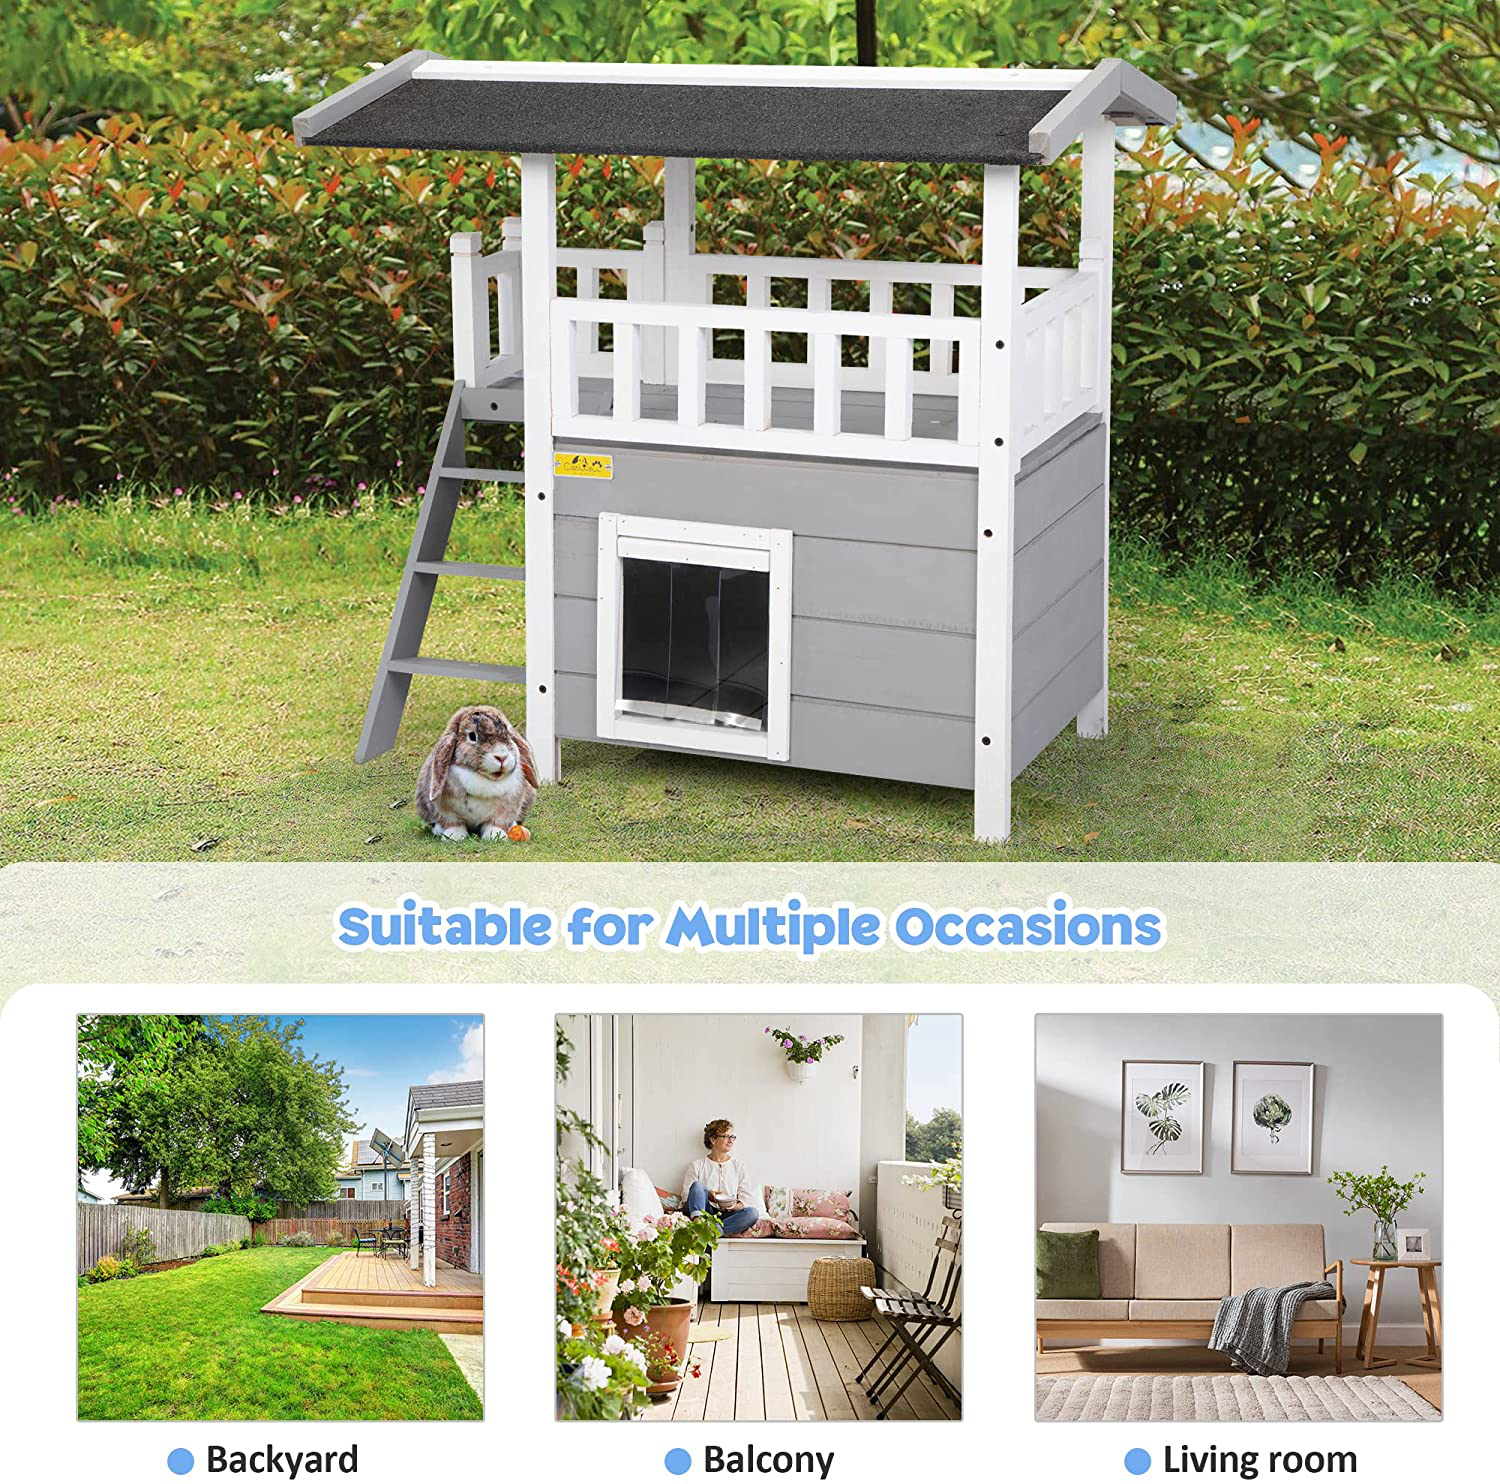 COZIWOW Small Dog/Cat Houses& Habitat Indoor Outdoor Waterproof, Wood Pet Furniture, Wooden Rabbit/Cat Hut Shelter for Cat Kitten Bunny Puppy with Stairs Balcony